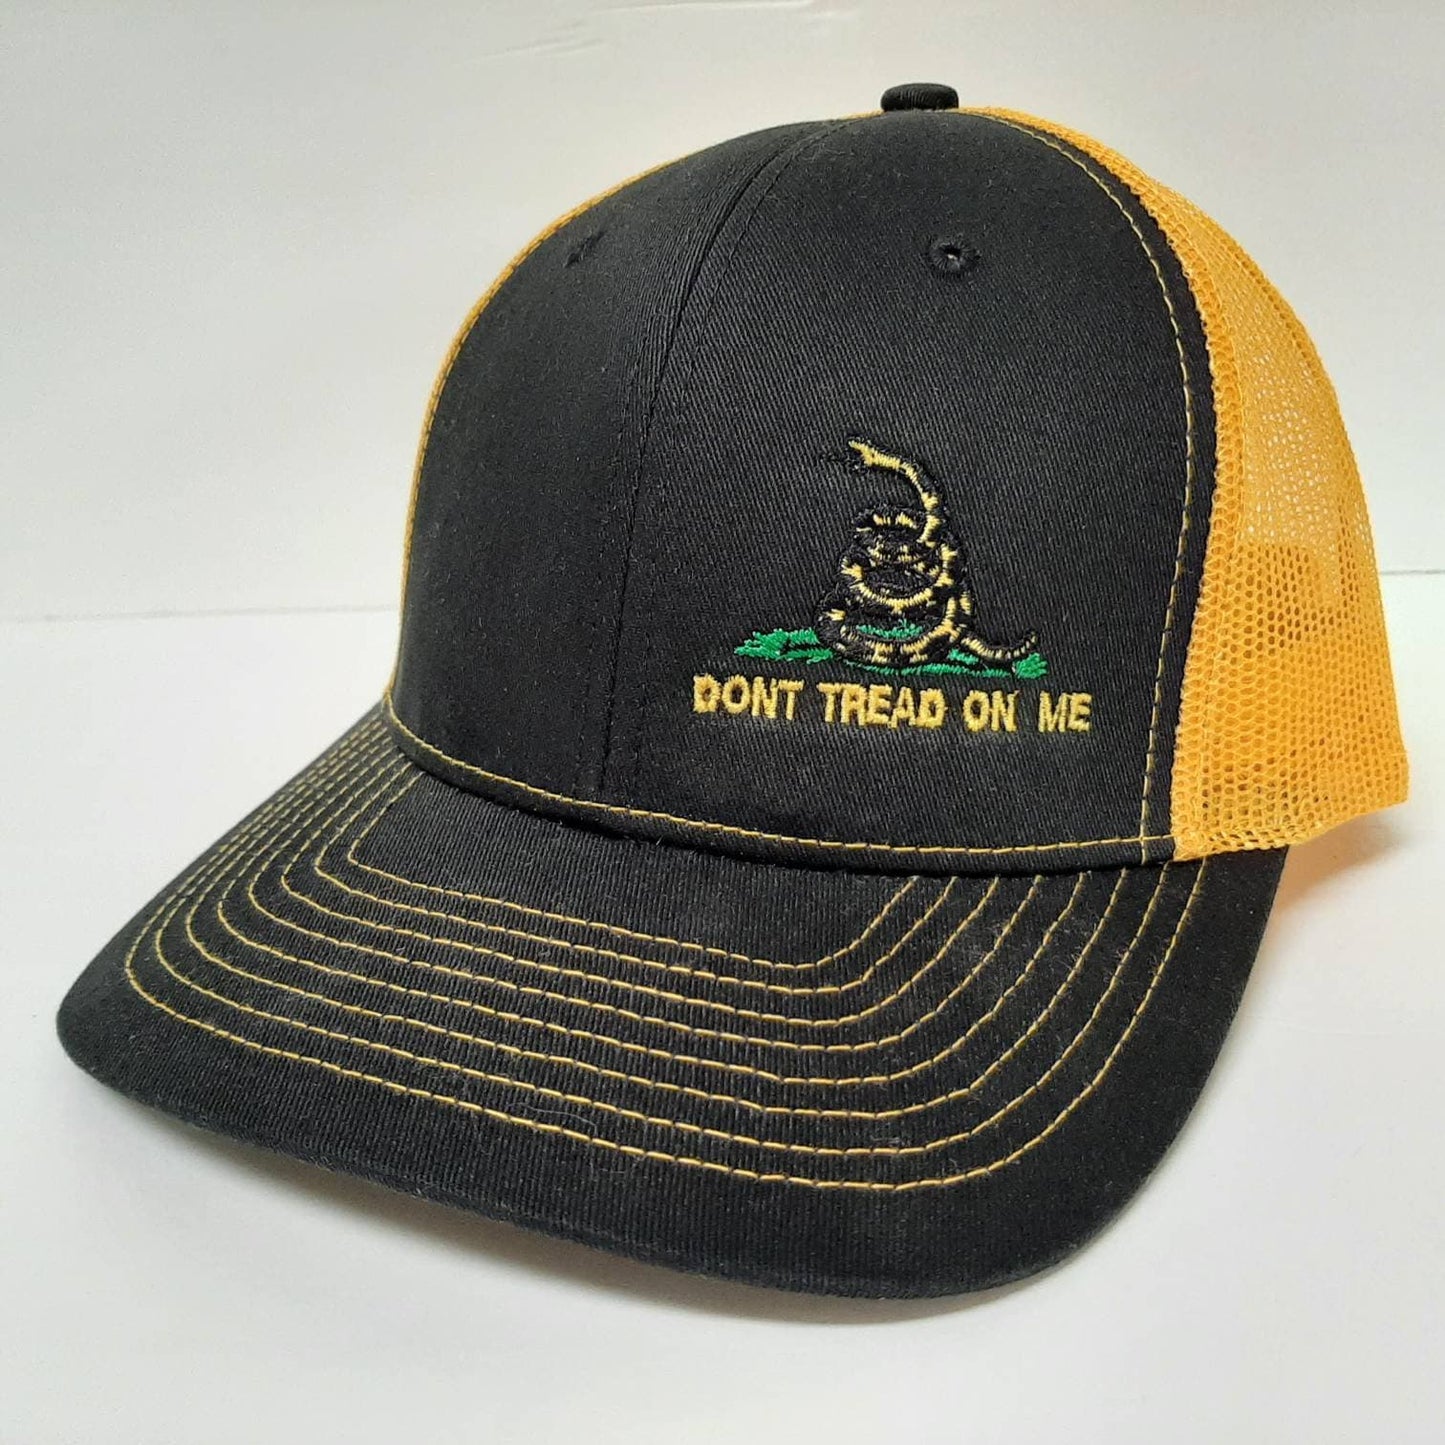 Don't Tread On Me Hat Cap Embroidered Mesh Snapback Snake black Yellow